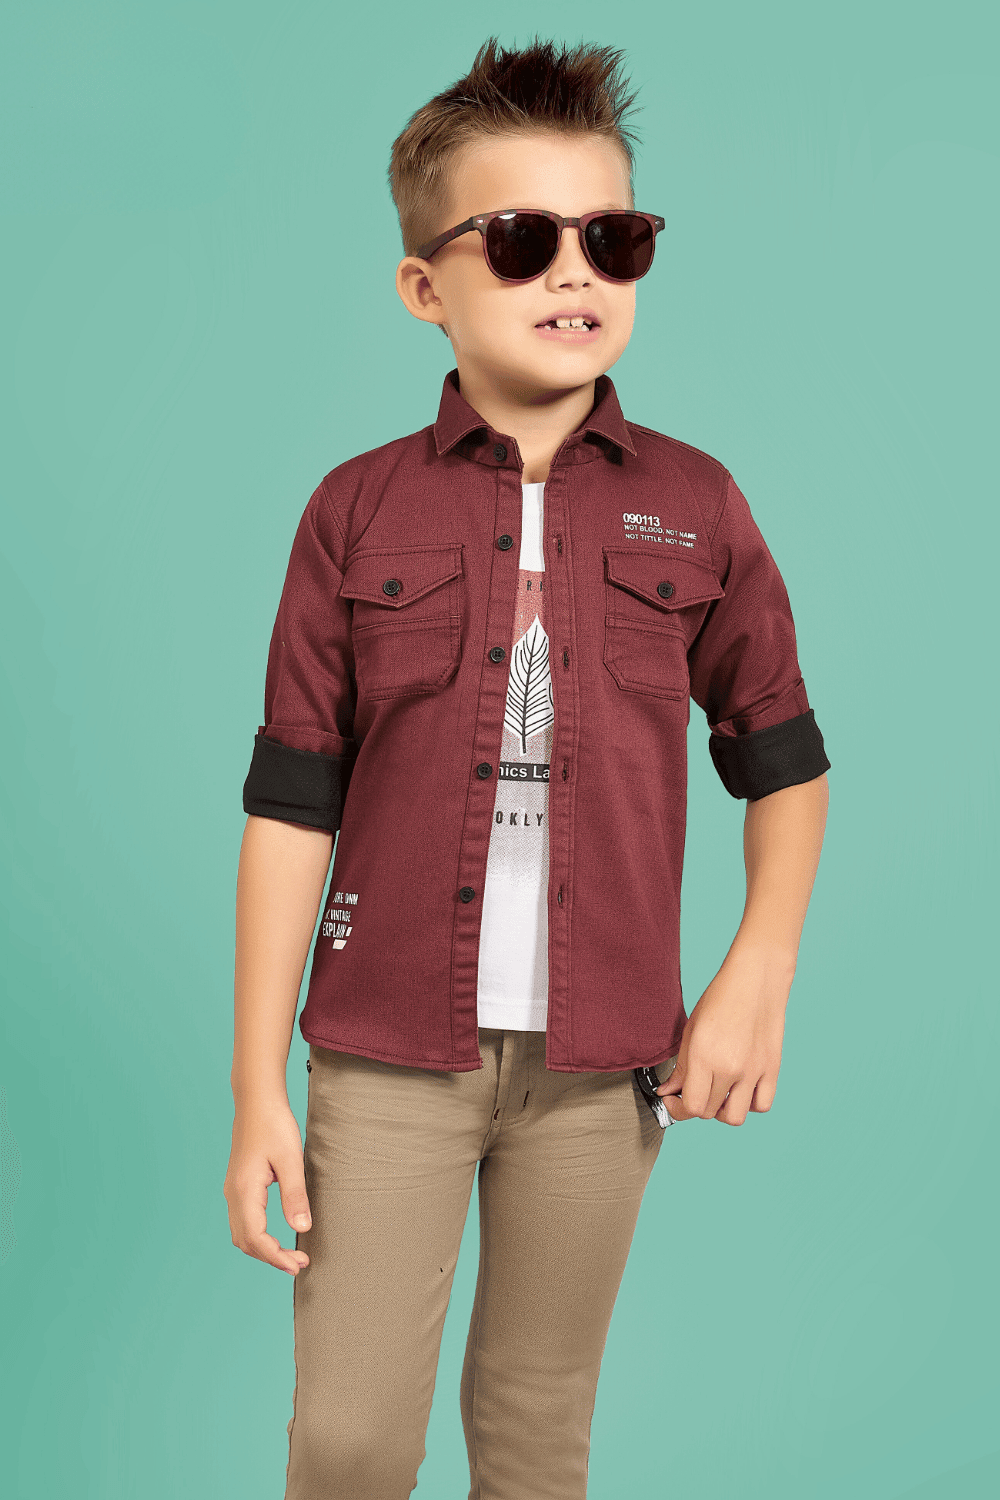 Maroon Blazer with White T-Shirt and Beige Pant Set for Boys with Belt - Seasons Chennai